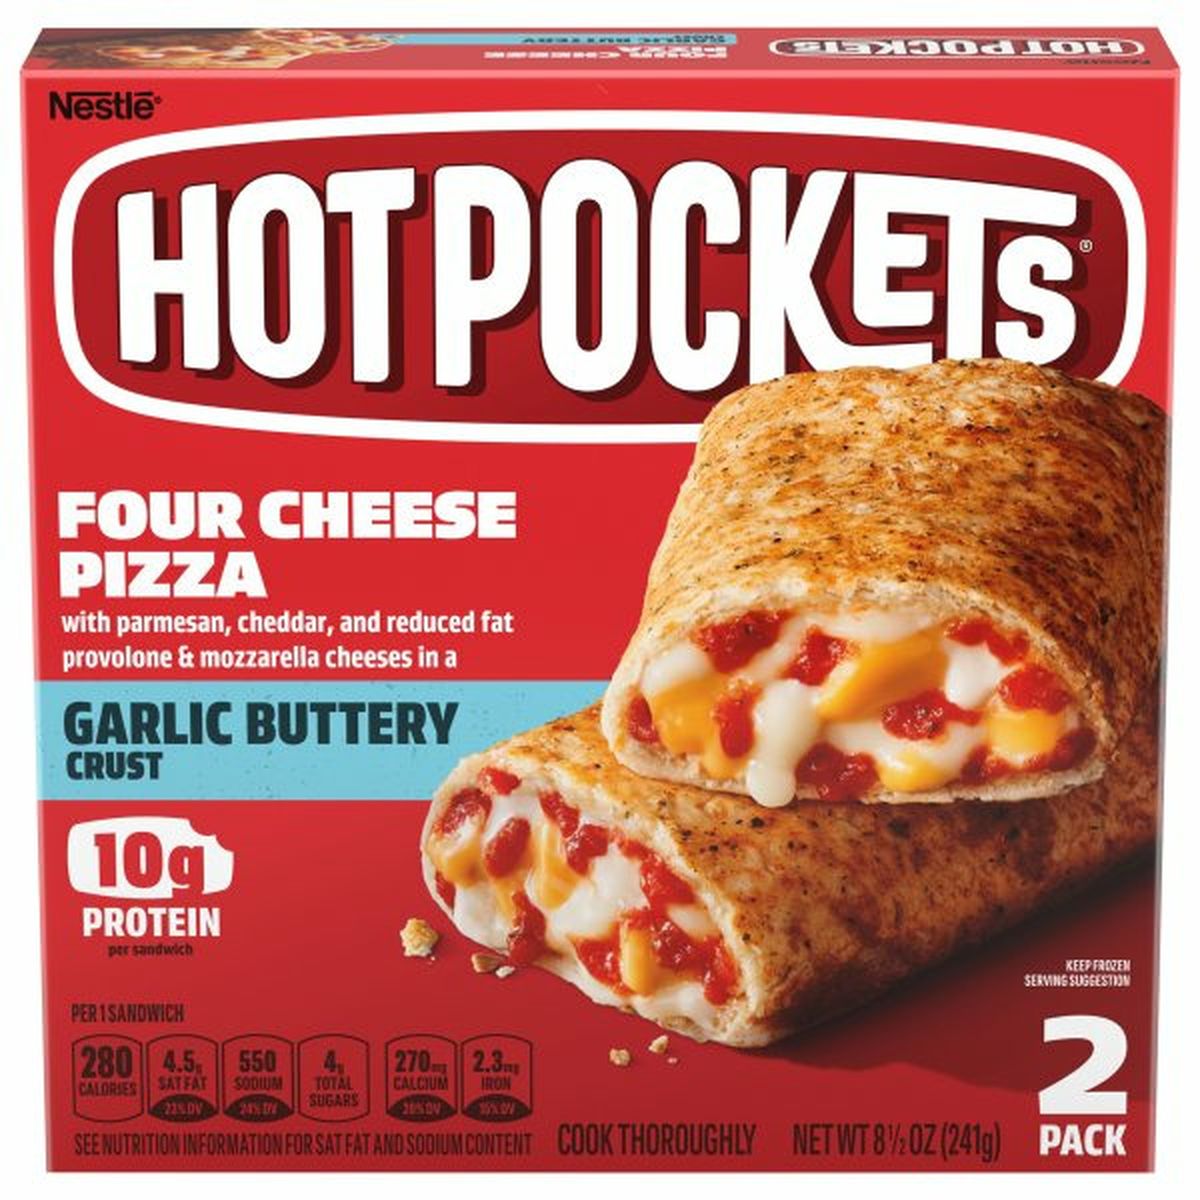 Calories in Hot Pockets Sandwich, Four Cheese Pizza, 2 Pack